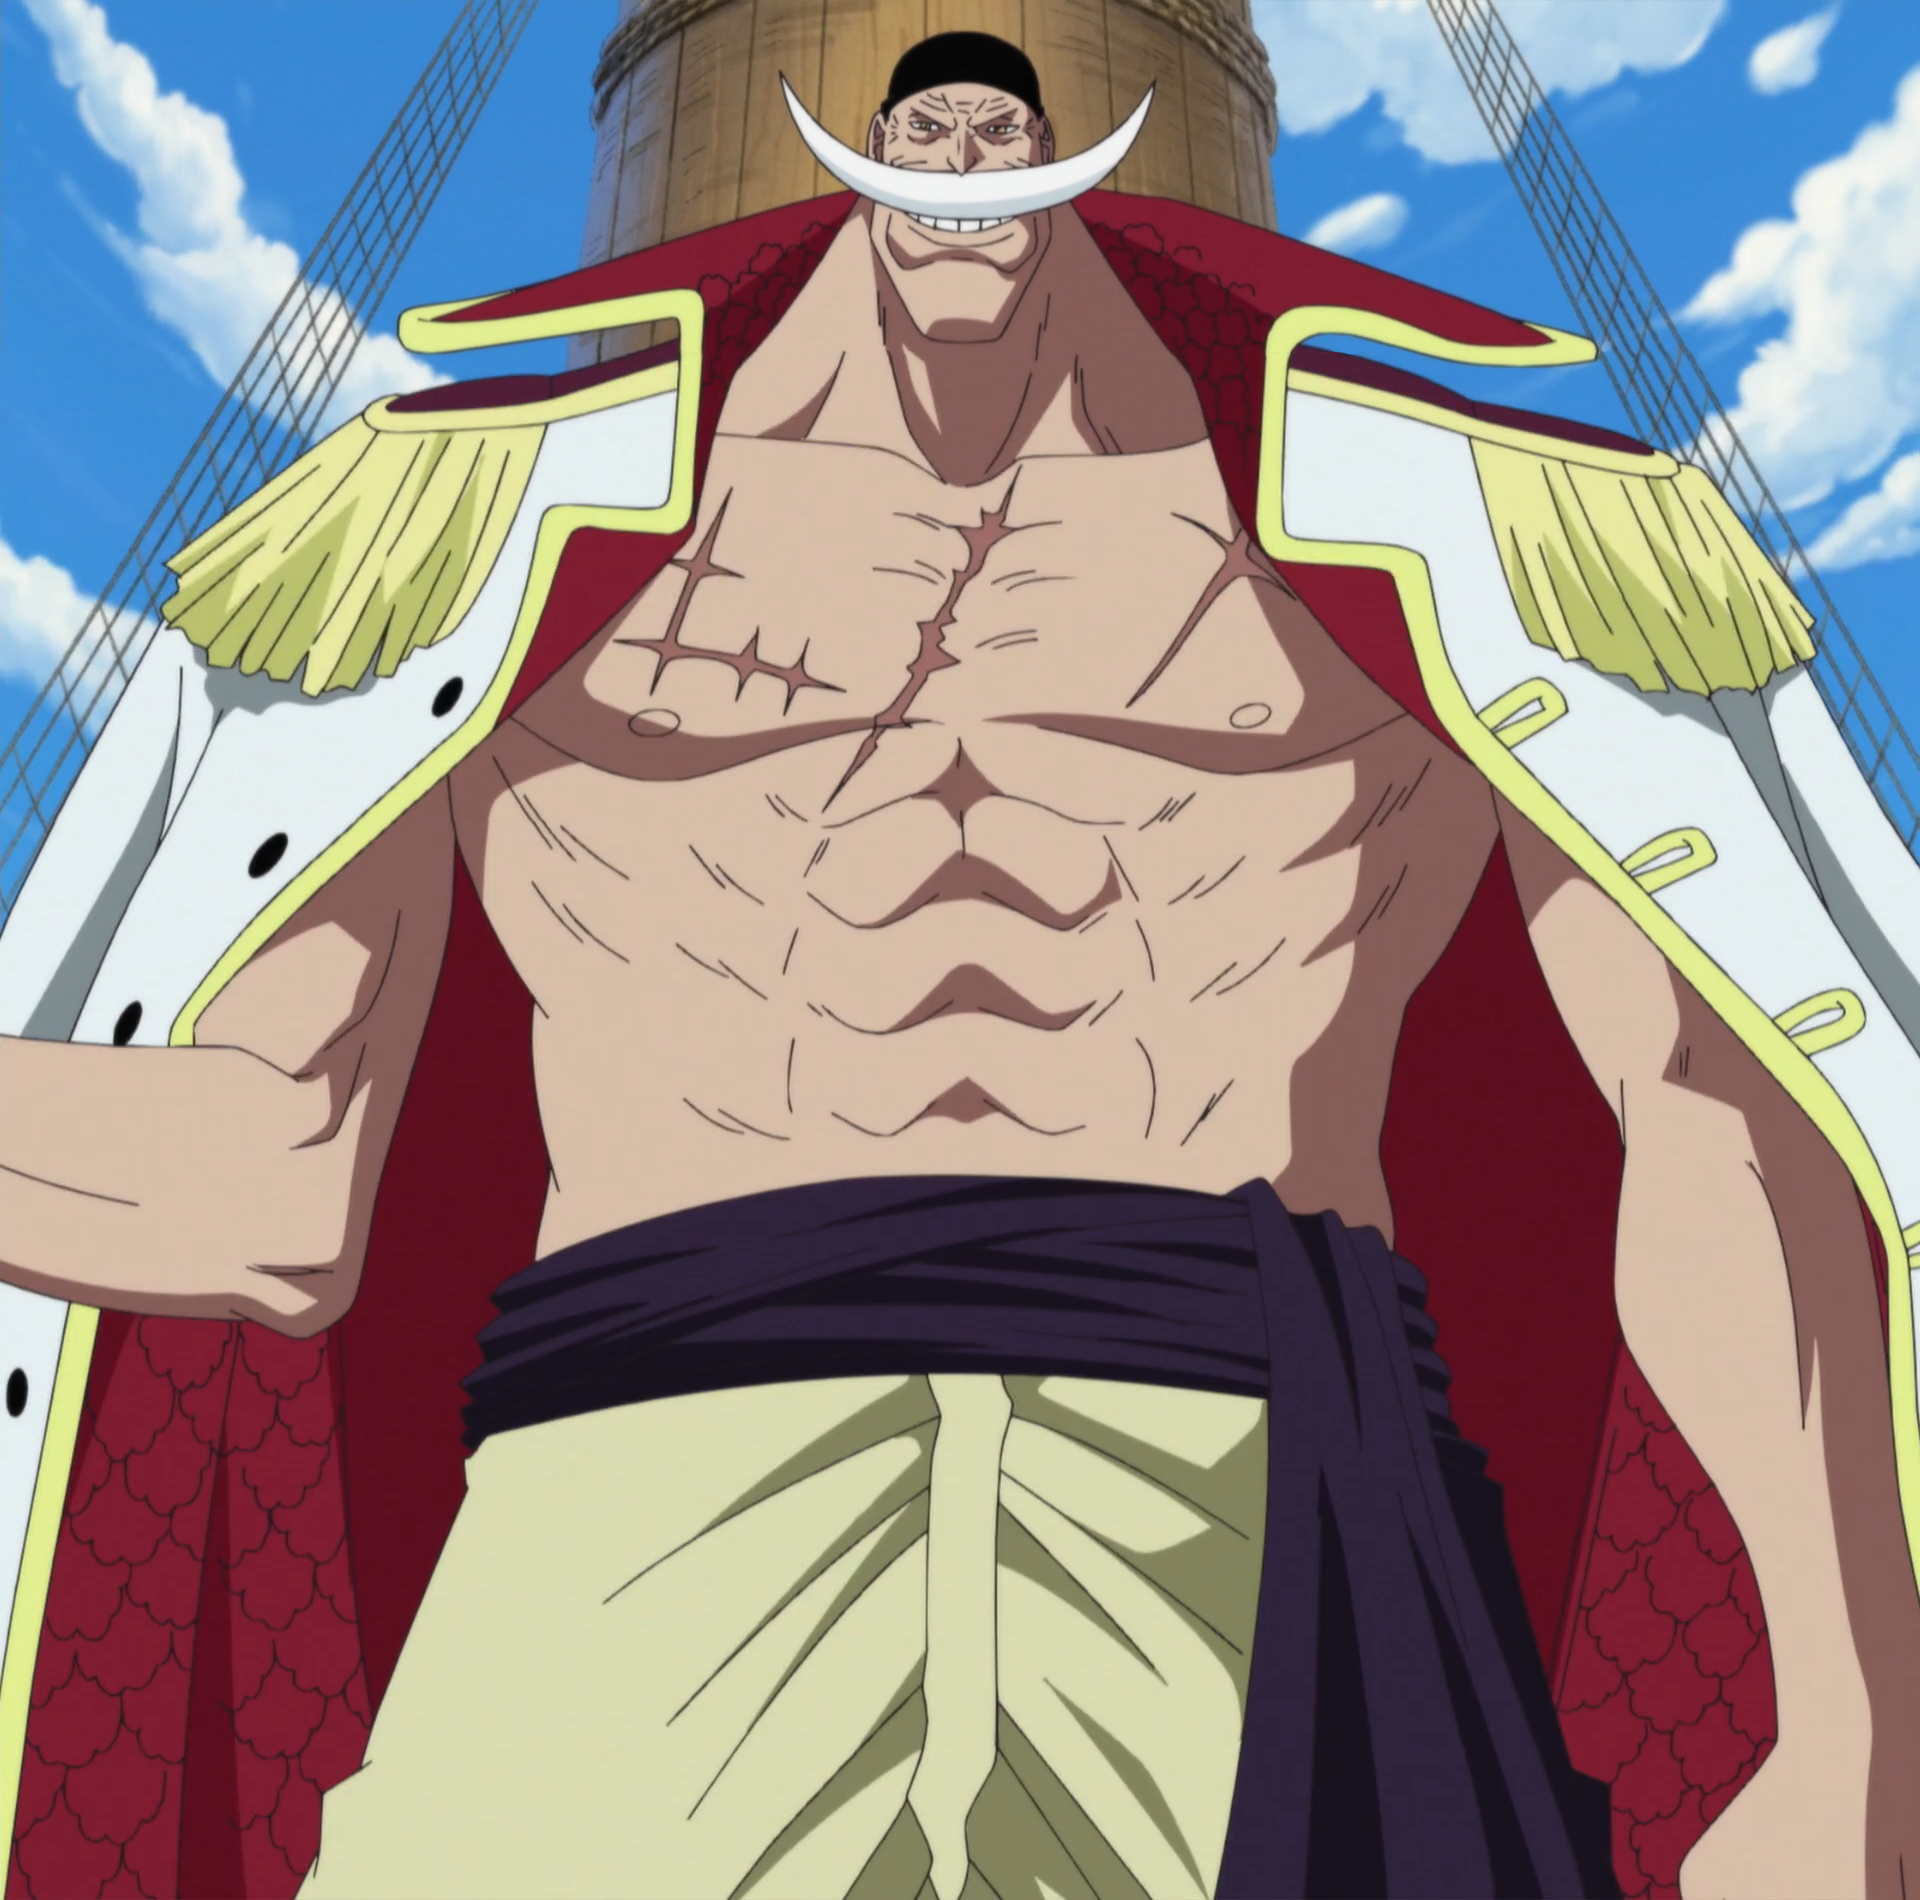 vain-bison697: One Piece style person with pale white skin with